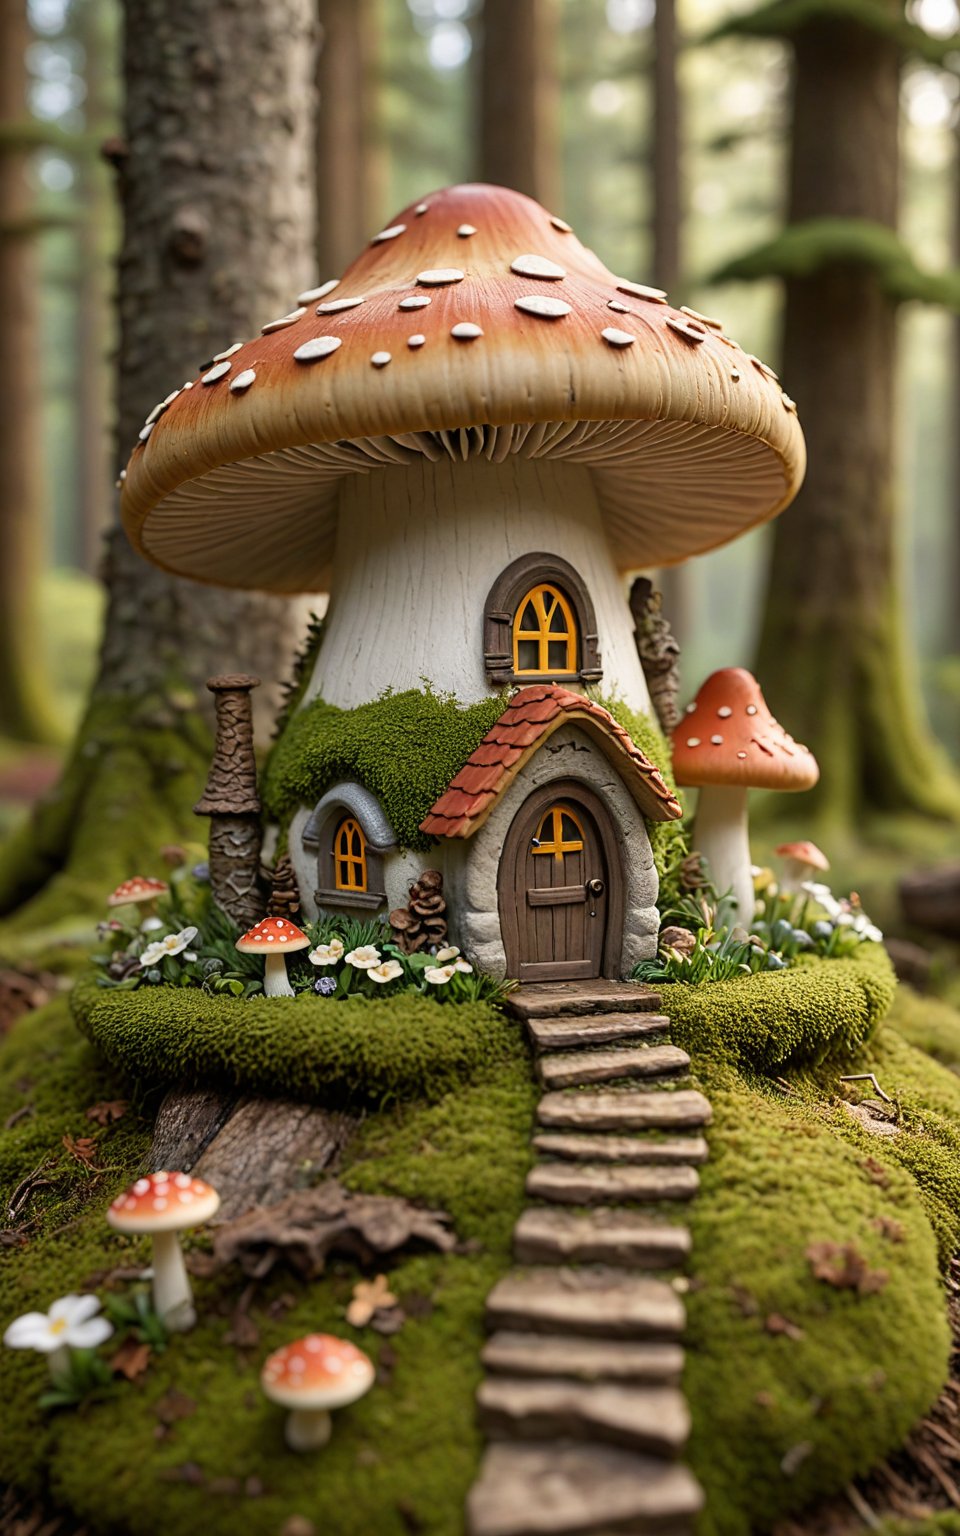 (best quality, 4k, 8k, highres, masterpiece:1.2), ultra-detailed,A whimsical, fairy tale-inspired mushroom house nestled in a lush, enchanted forest, enhanced with a tilt-shift photography effect. The tiny house features a moss-covered, cone-shaped roof with small, glowing windows that emit a warm, inviting light. Surrounding the house are vibrant mushrooms and delicate flowers, with additional moss and lichen adding texture and a sense of age. The tilt-shift effect creates a miniature, diorama-like appearance, focusing on the intricate details of the house while softly blurring the forest background. The setting exudes a sense of wonder and enchantment, perfect for a storybook illustration